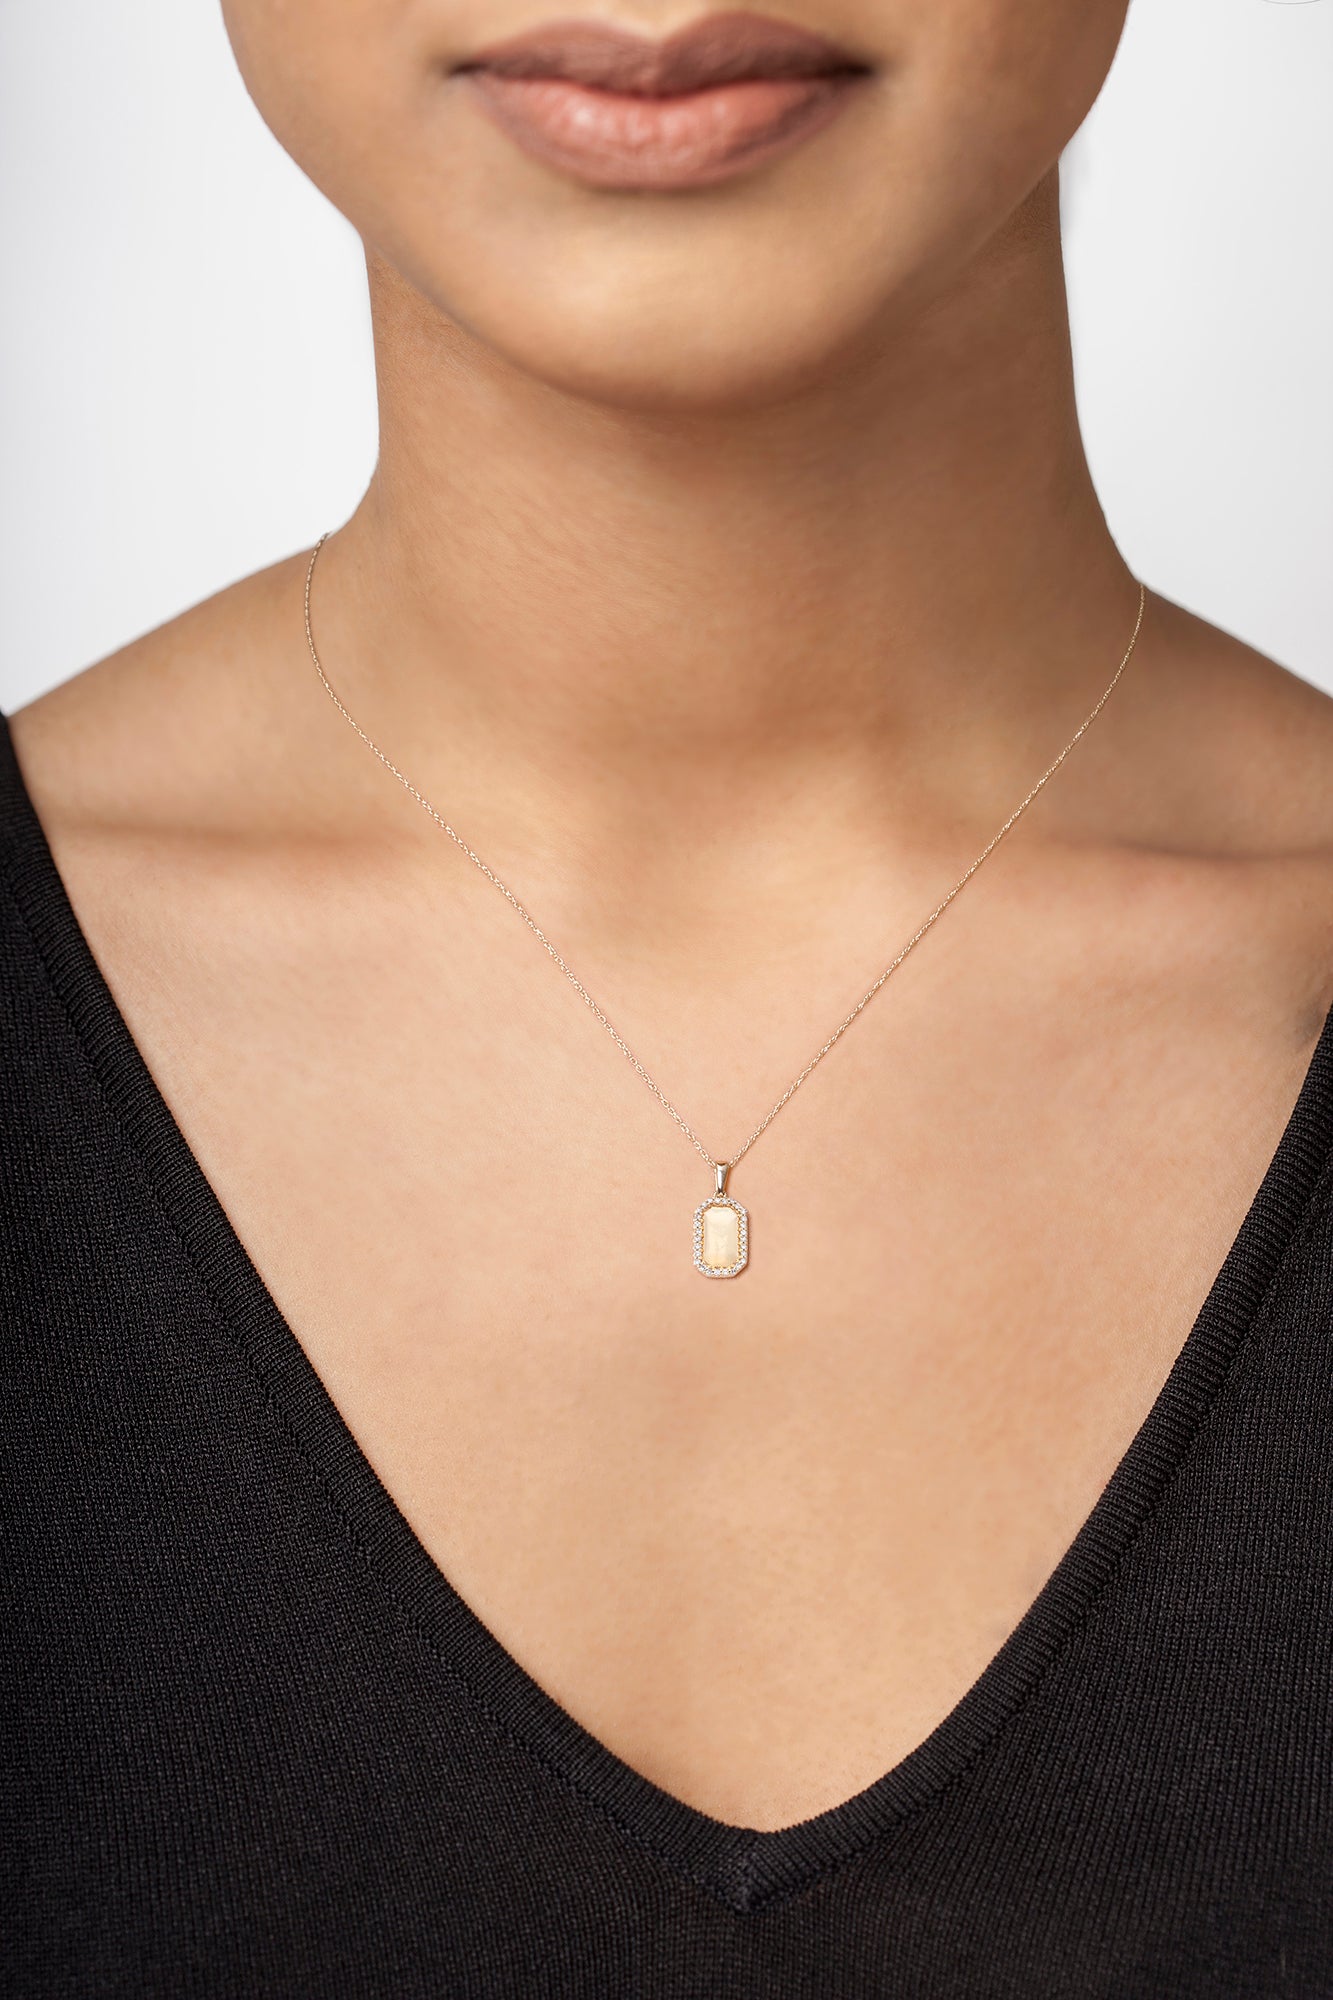 Pave Outline Necklace-70% OFF!